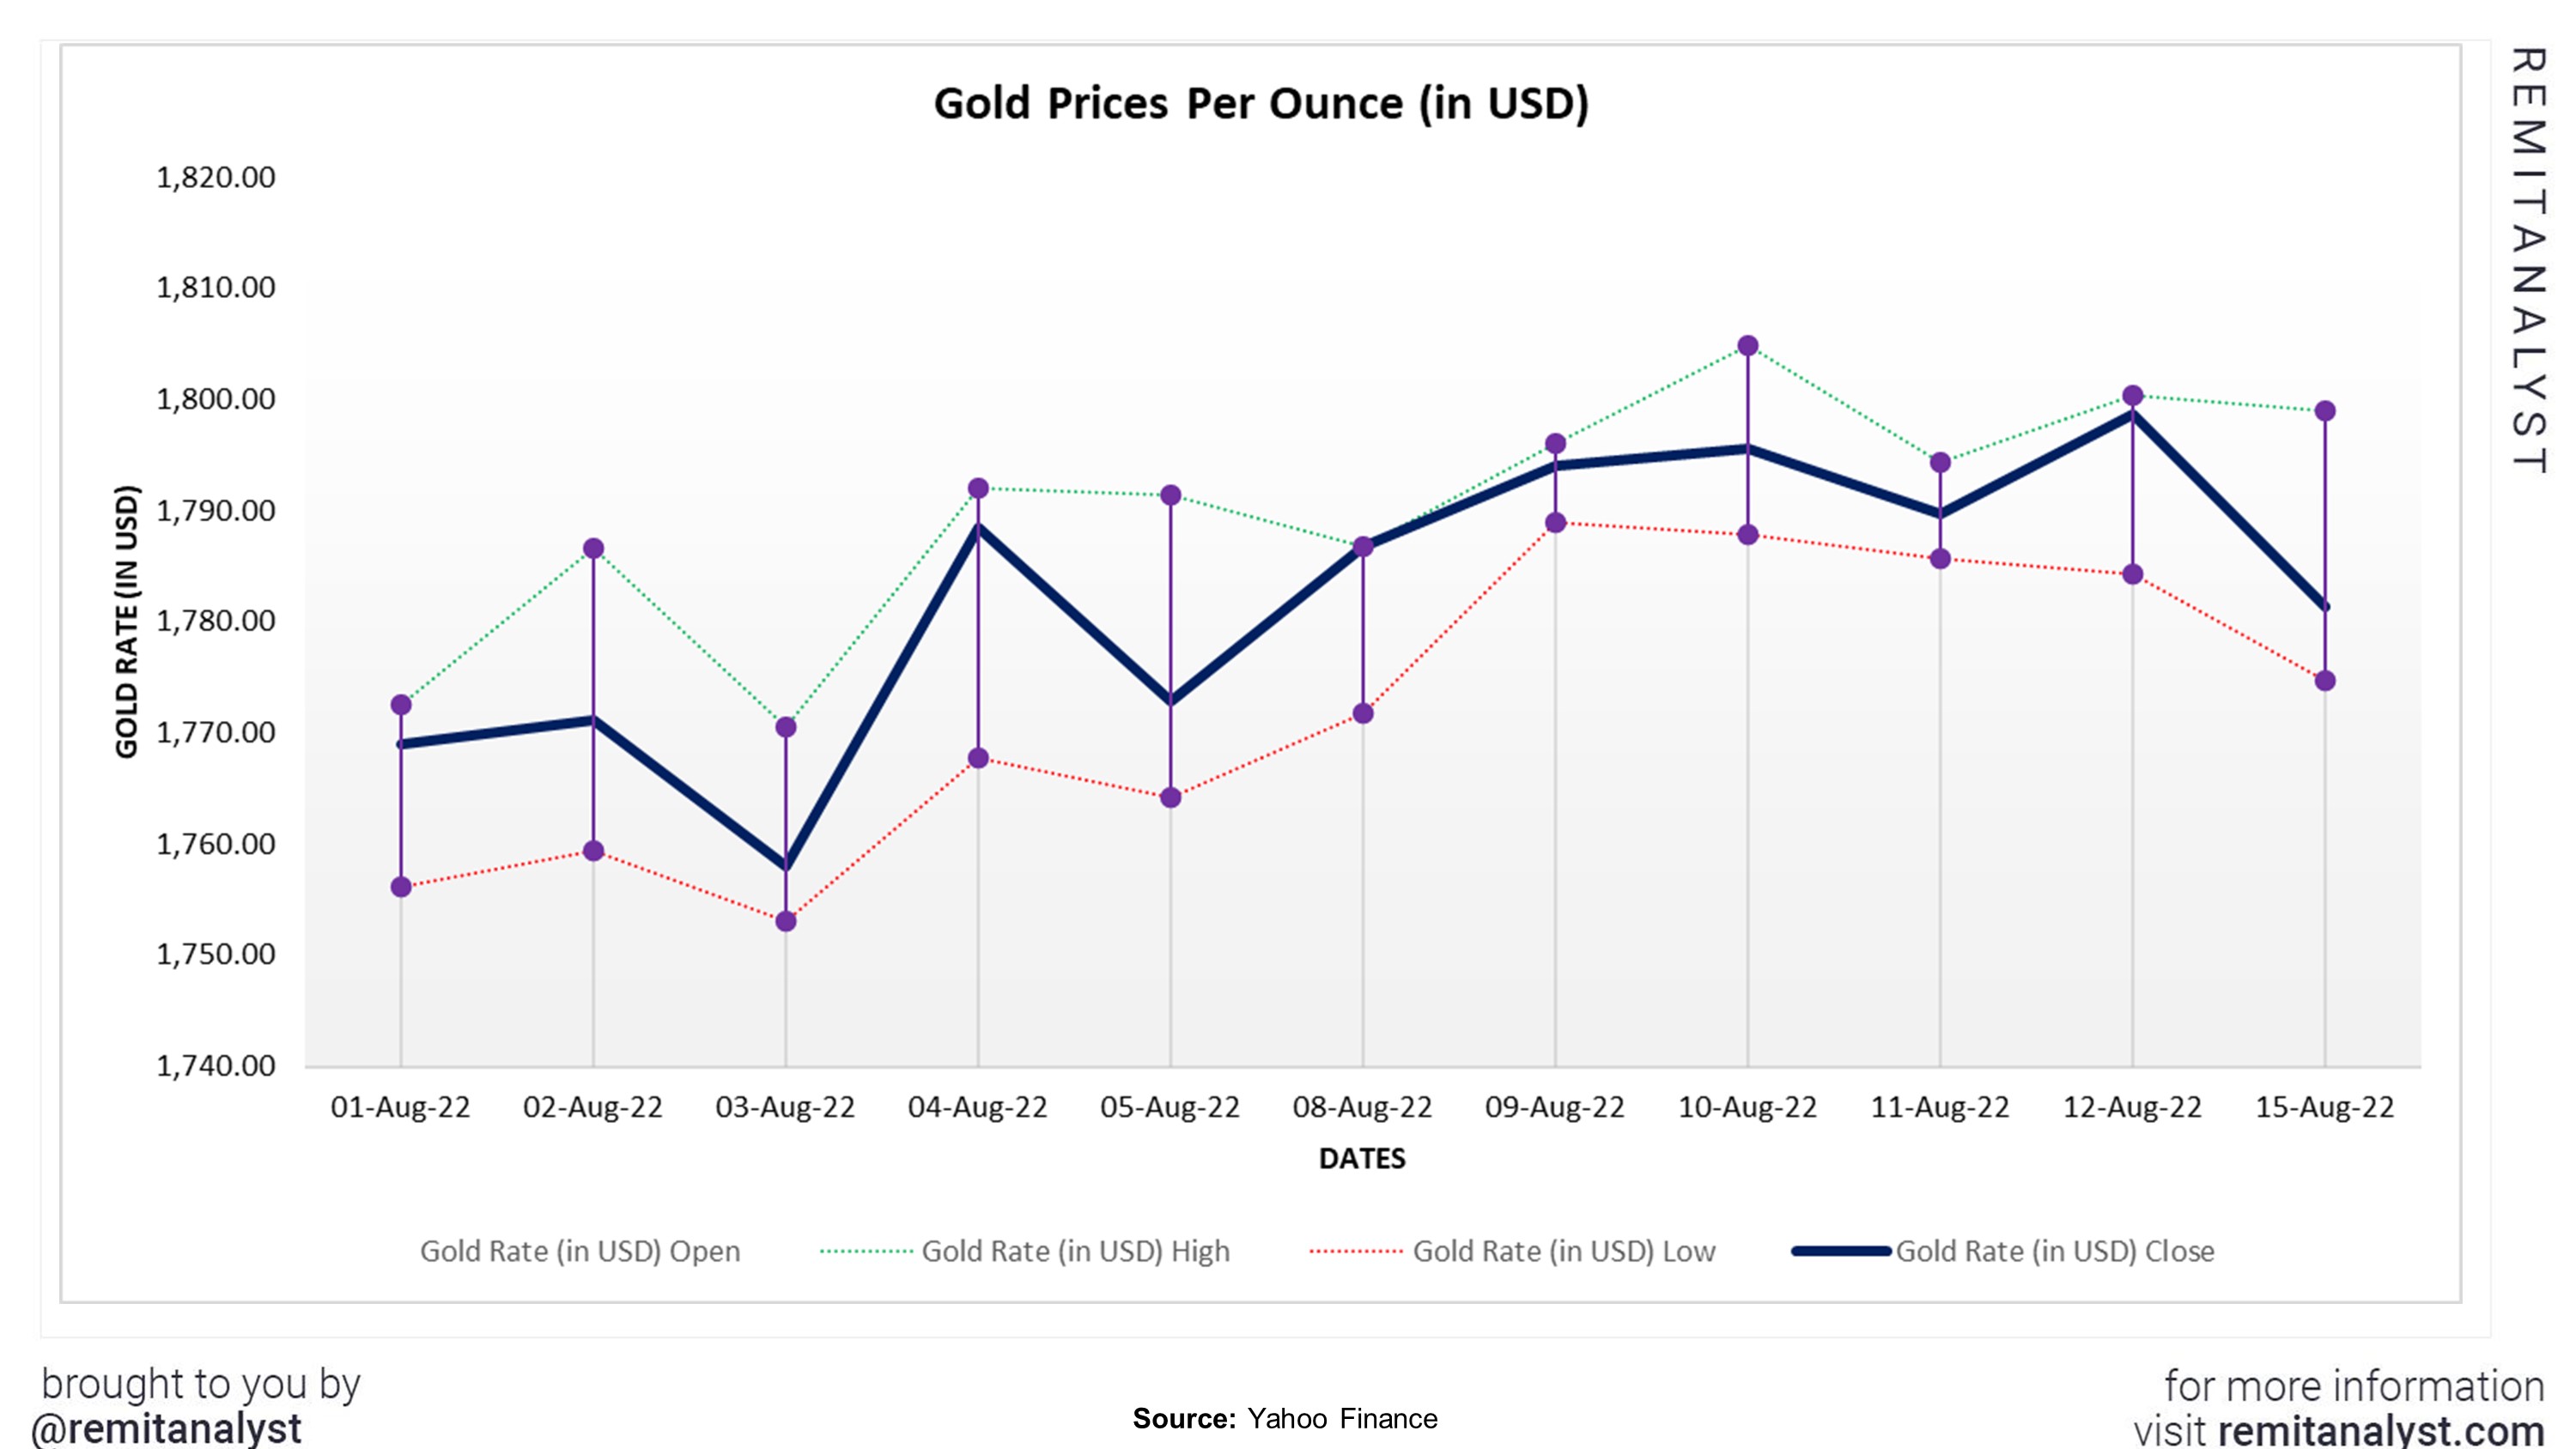 Gold_Prices_from_08-01-2022_to_08-15-2022.jpg